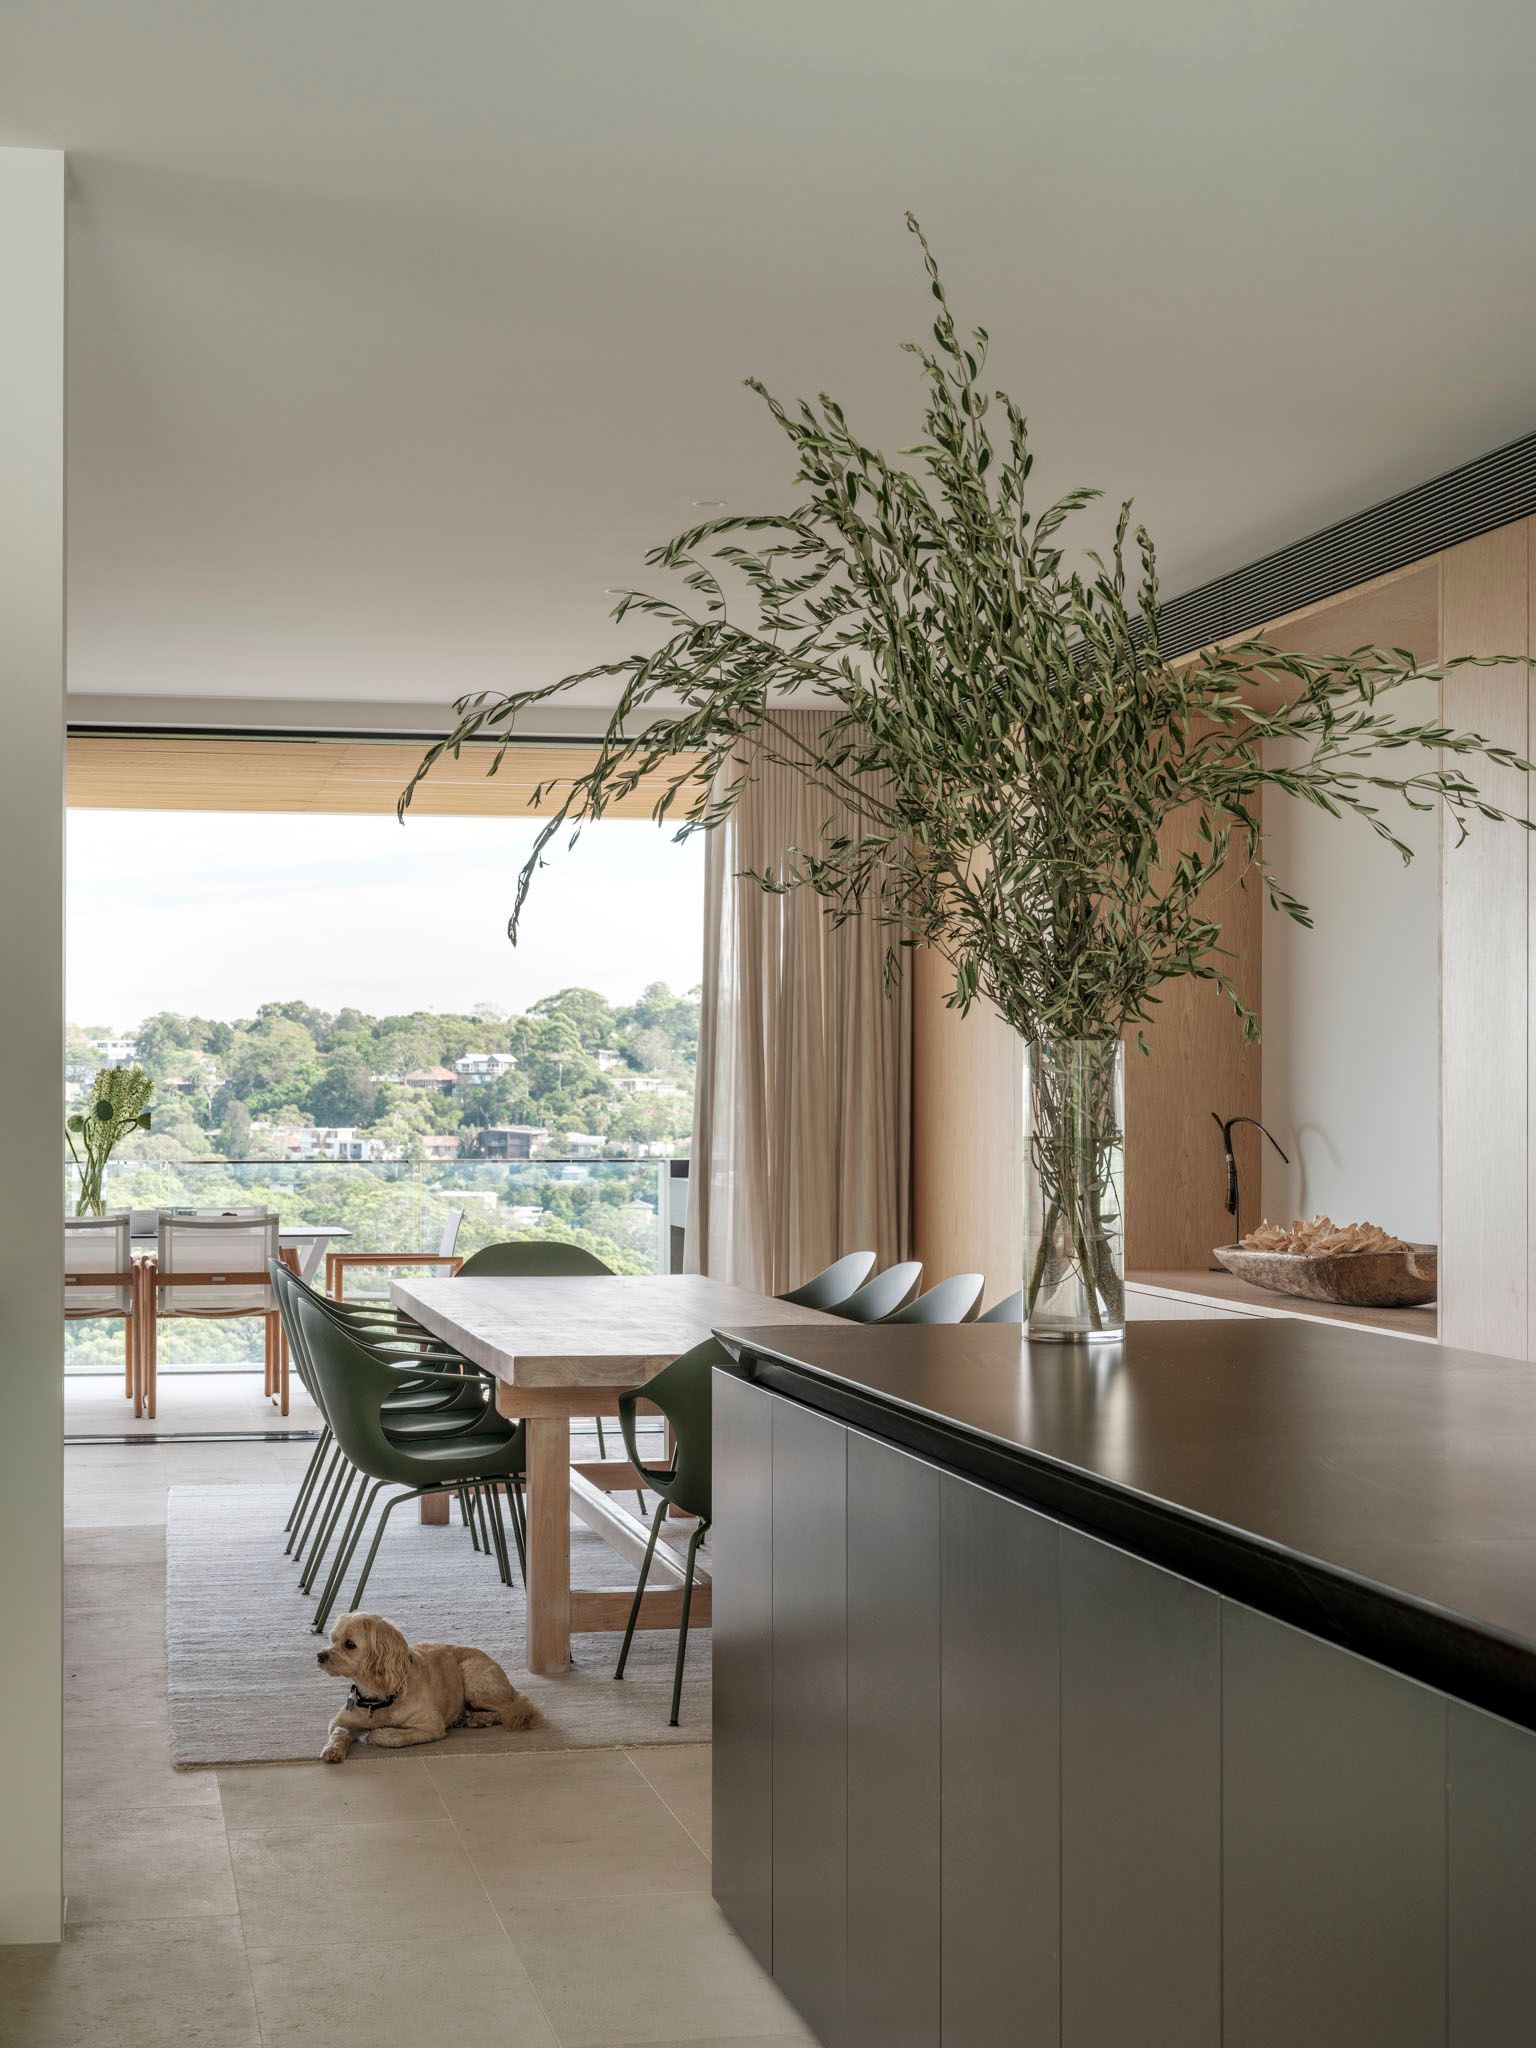 Northbridge by Corben Architects showing kitchen and dining interior spaces with puppy laying